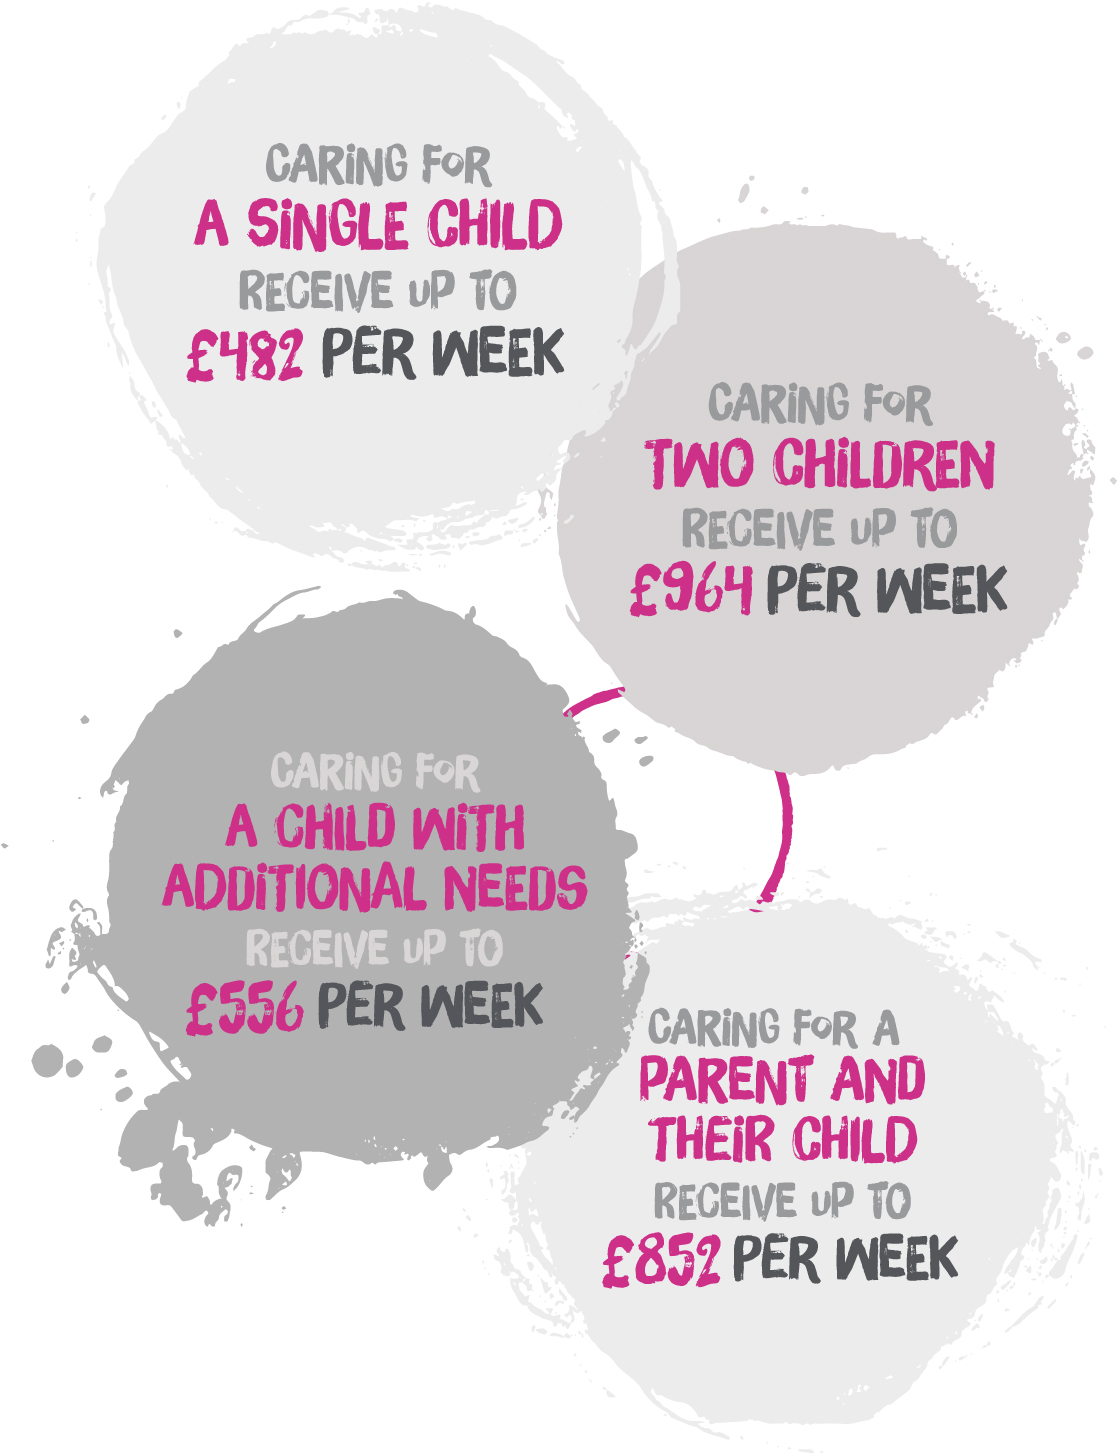 These are examples of our Wrexham fostering allowances